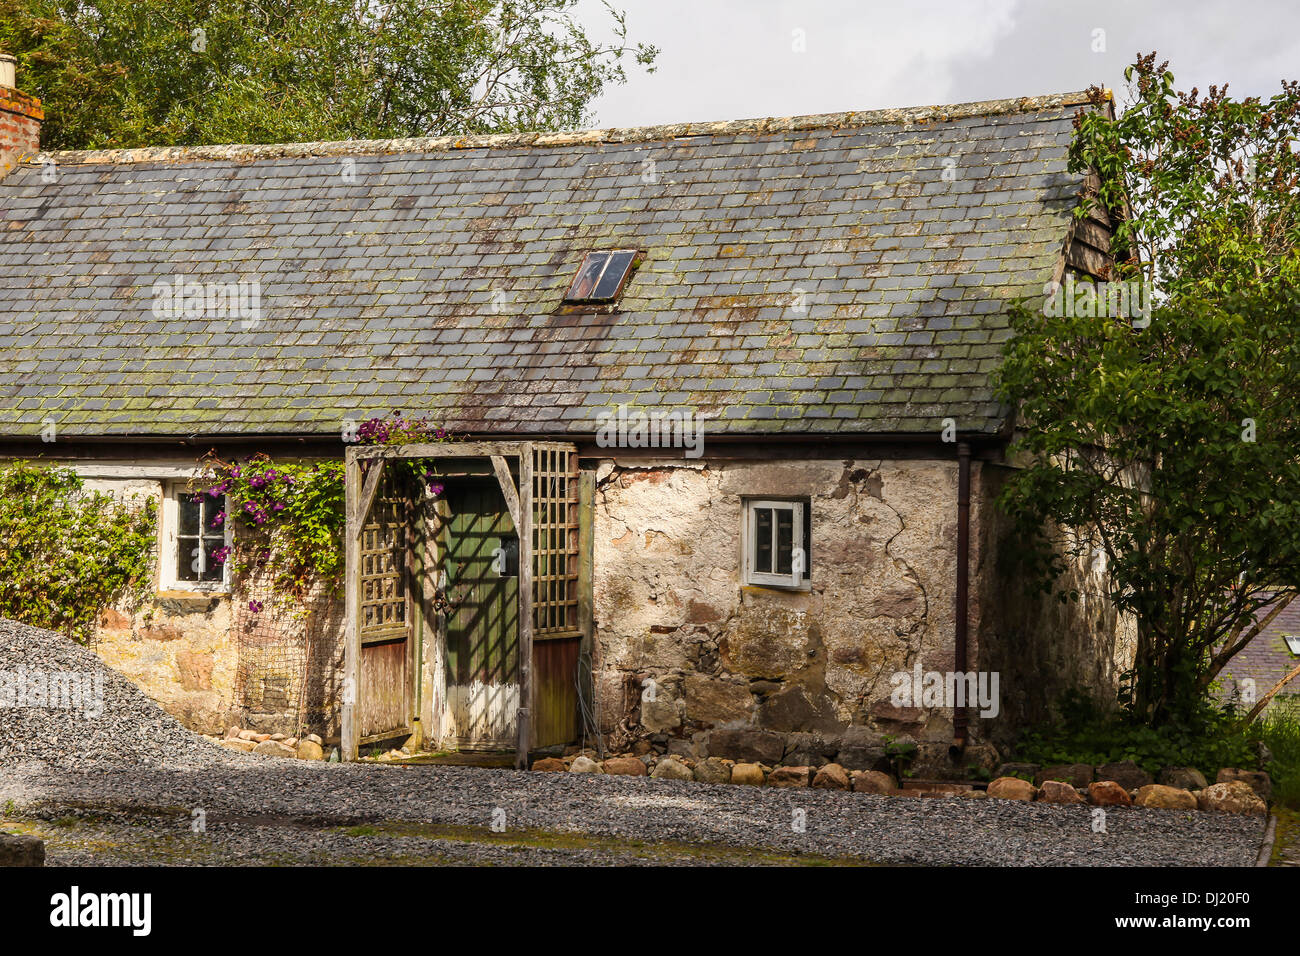 An old farm house in Scotland in decay Stock Photo